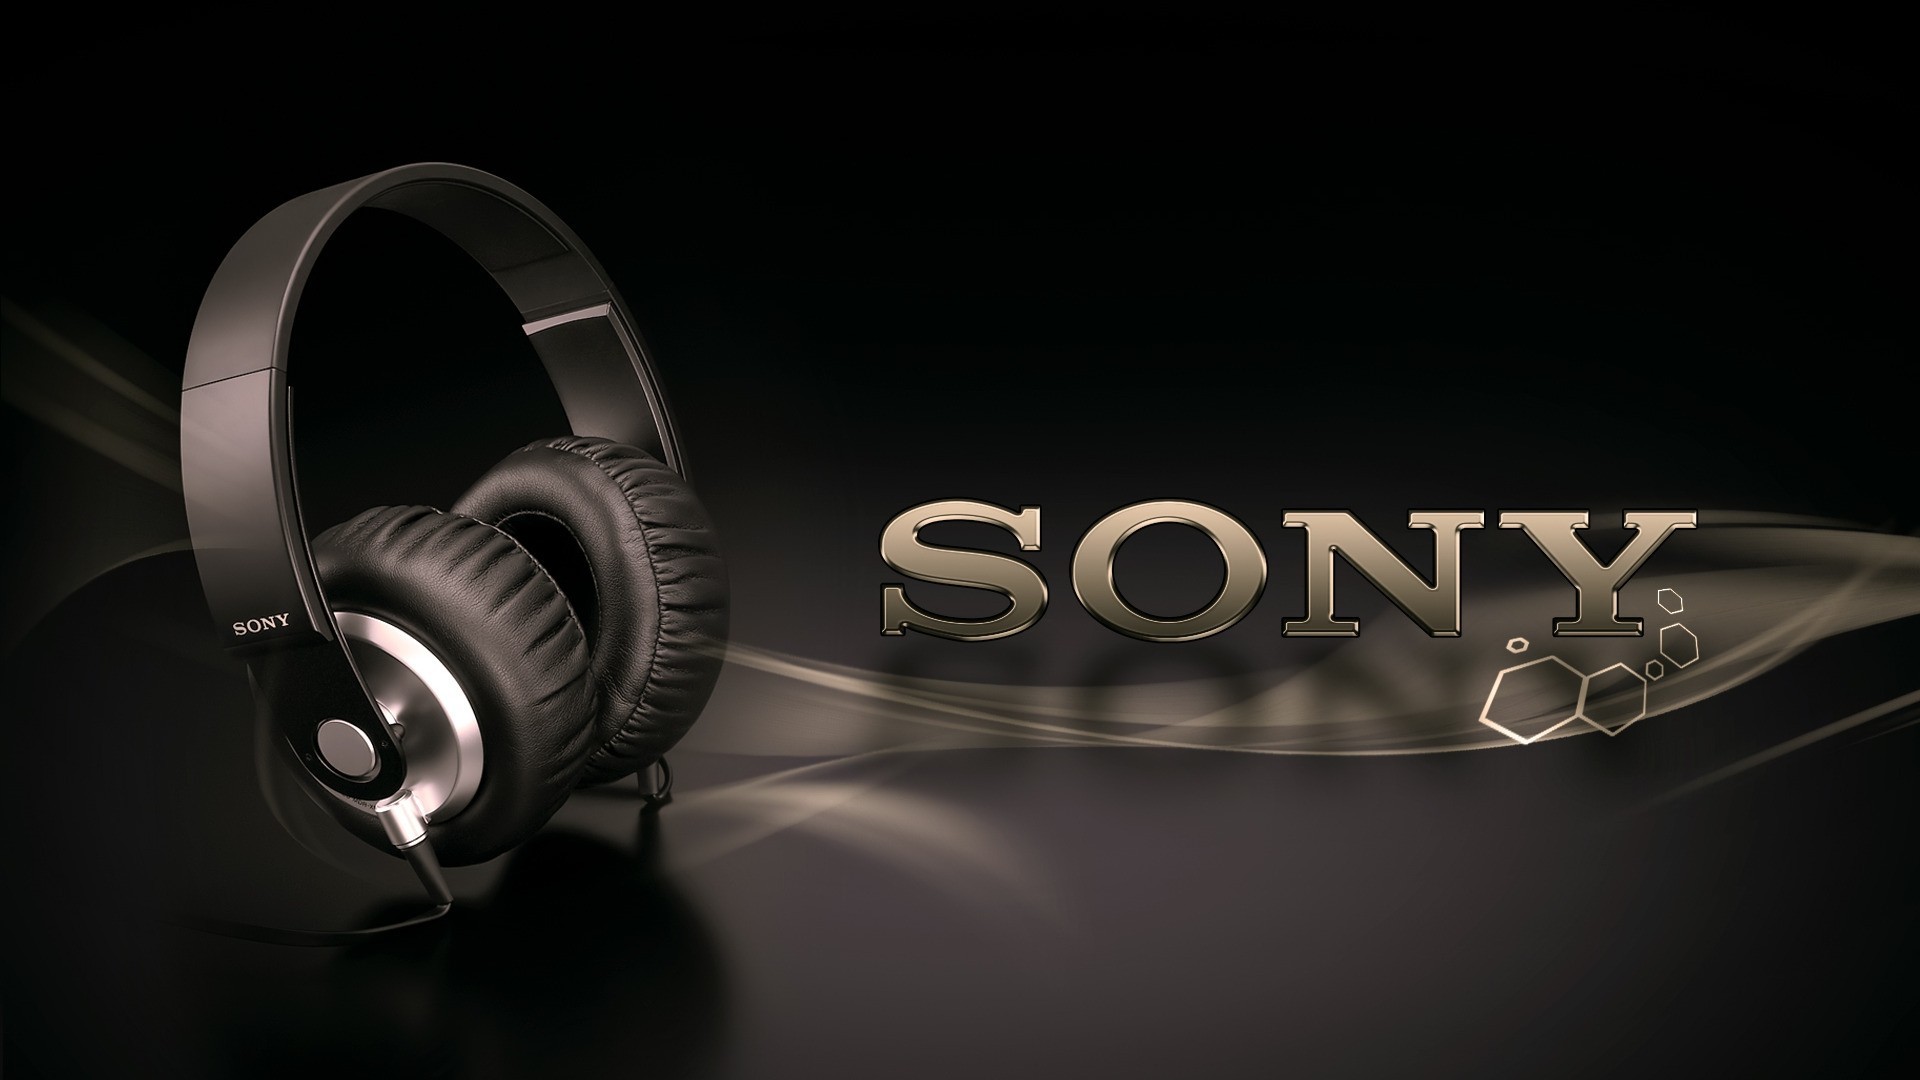 2196 Awesome Sony Wallpaper